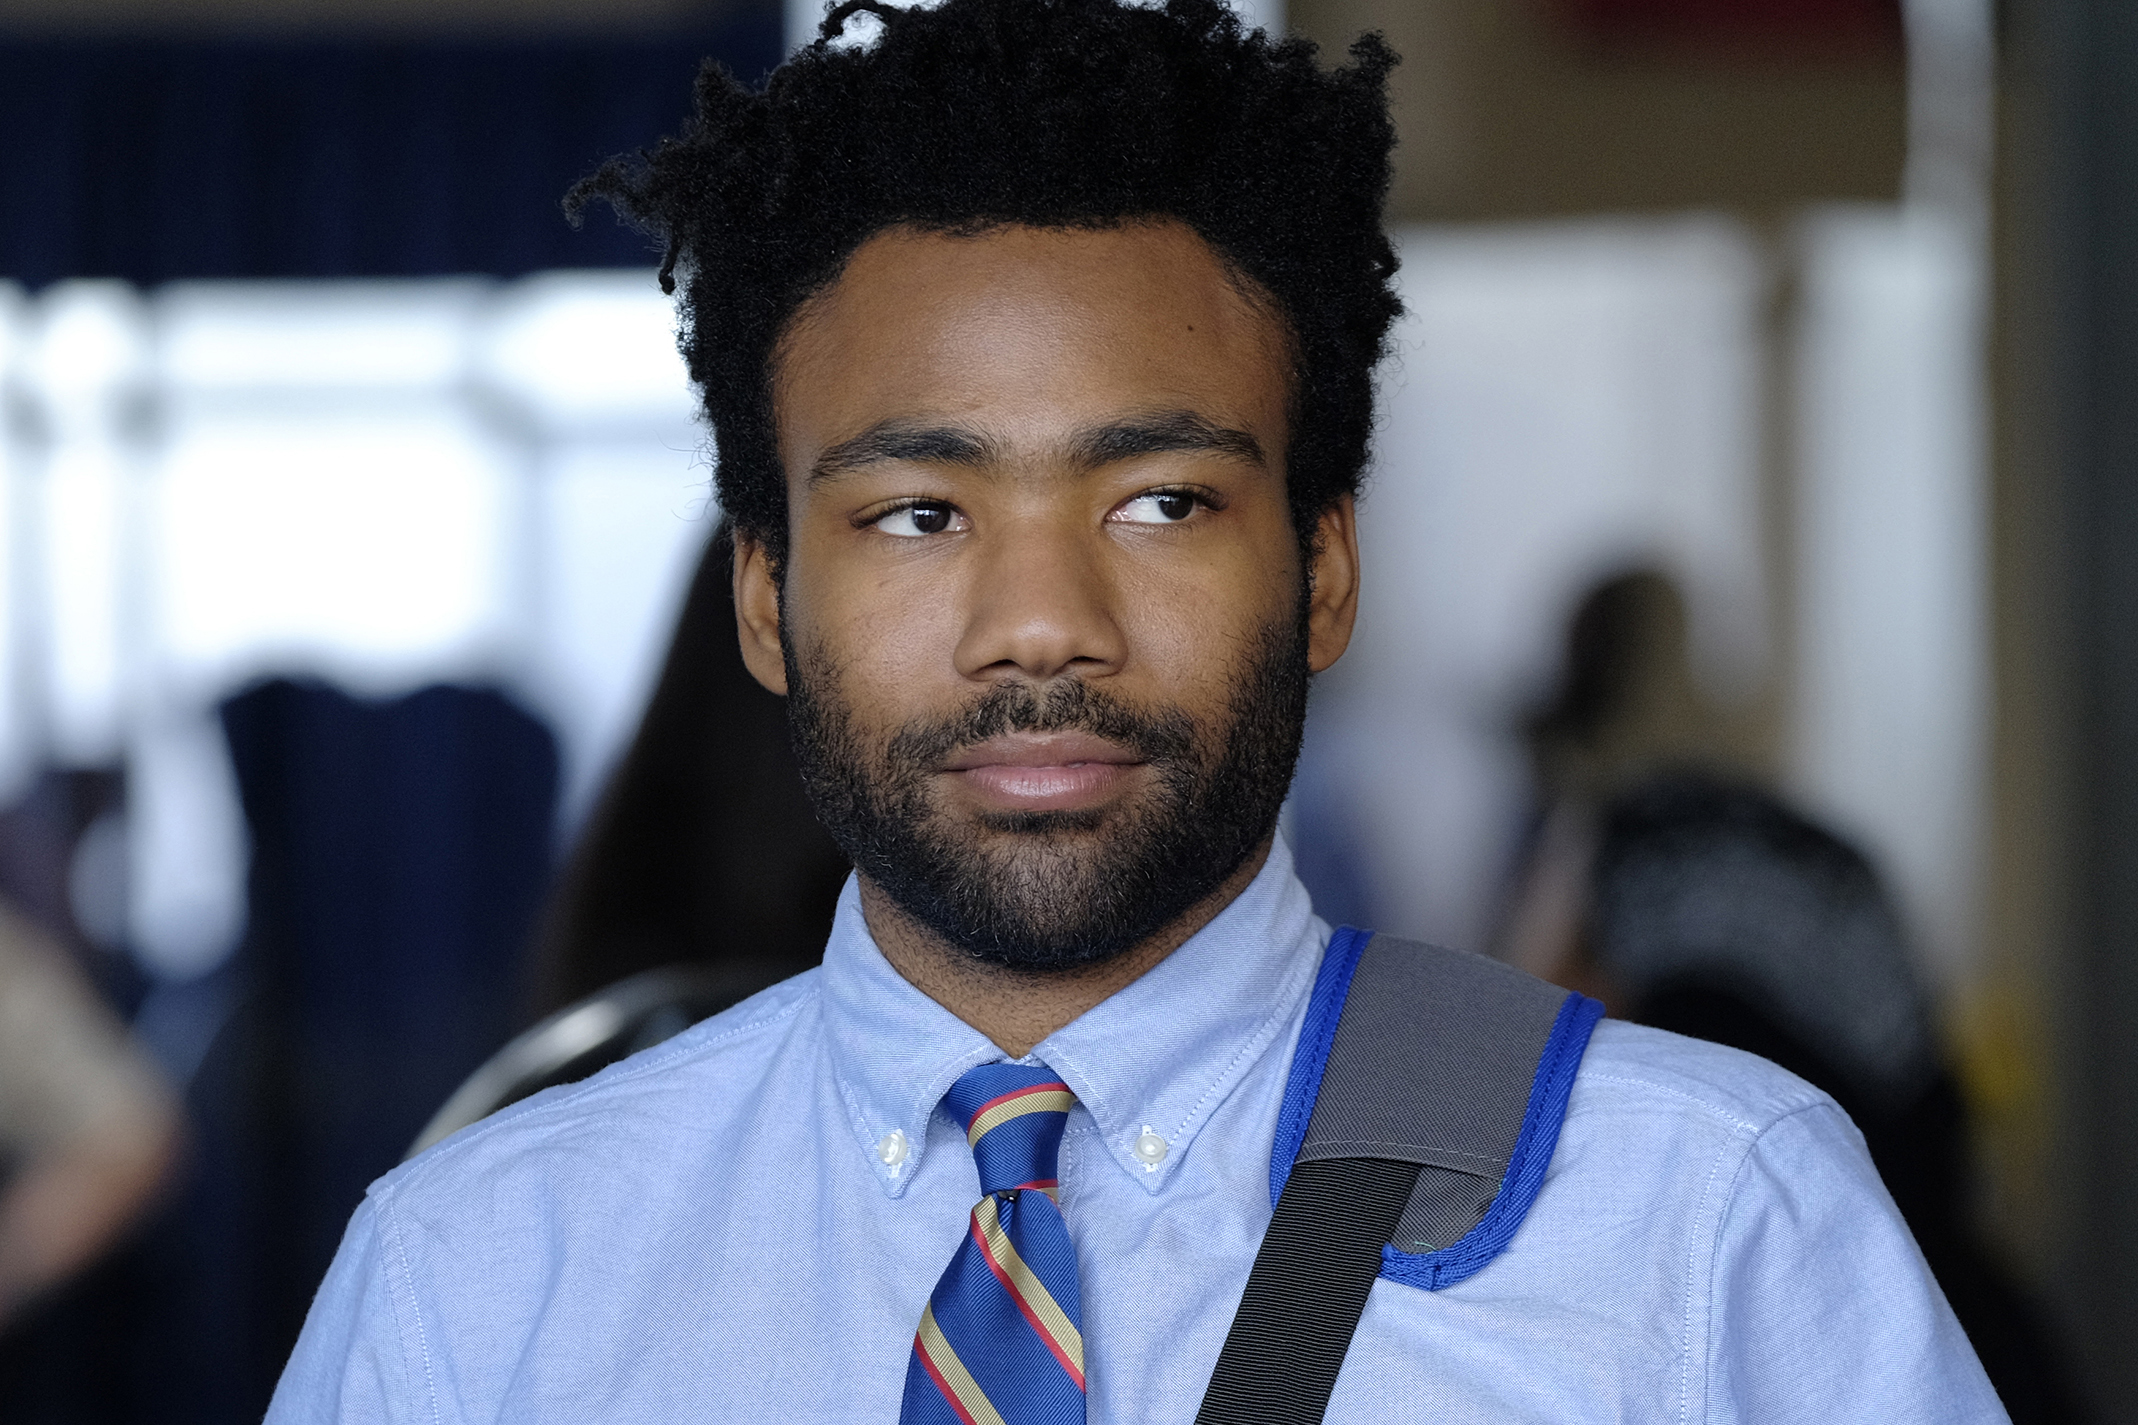 Donald Glover Biography [2022]: Age, Height, Net Worth, Wife, Parents, Popular Movies and TV Shows